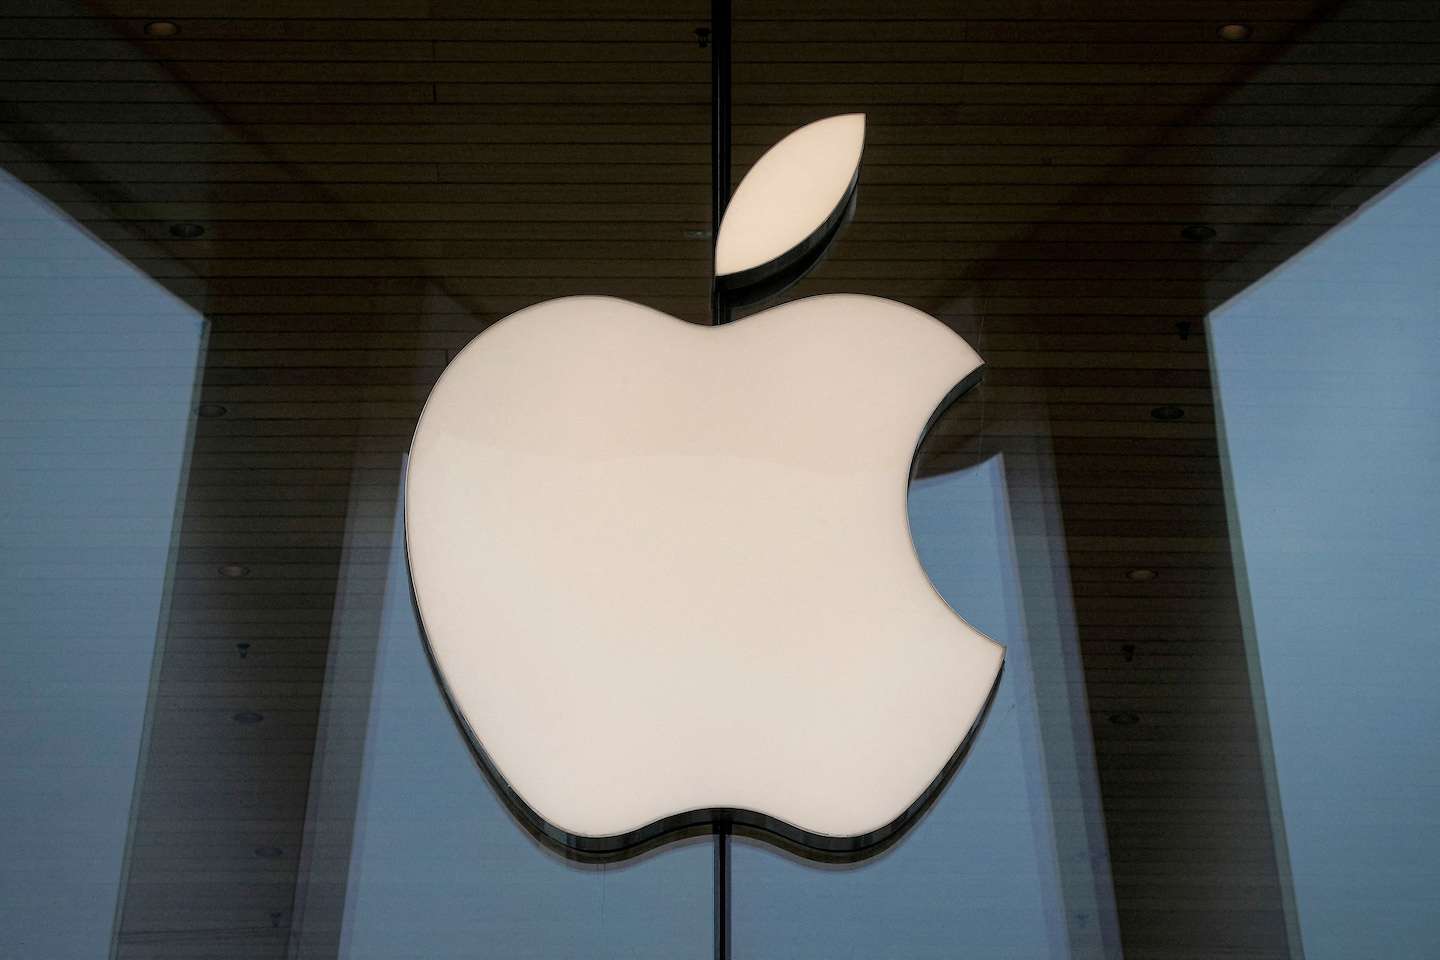 Oklahoma City Apple store becomes second in U.S. to vote to unionize